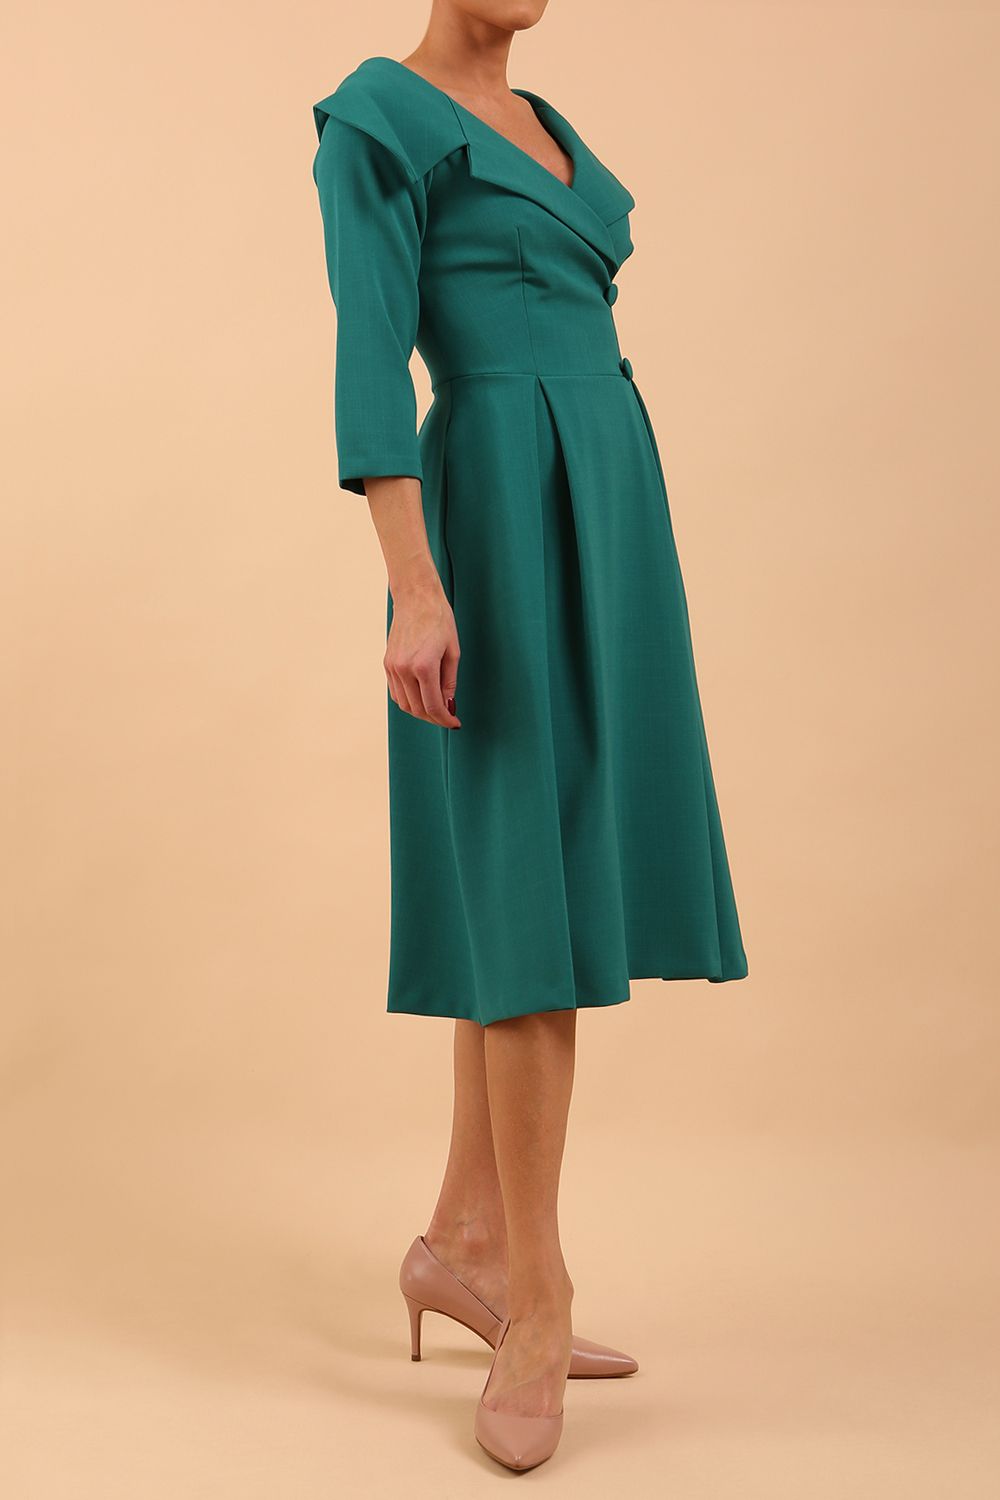 model is wearing diva catwalk gatsby swing dress with pocket detail and wide v-neck collar and buttons down the front panel in parasailing green front